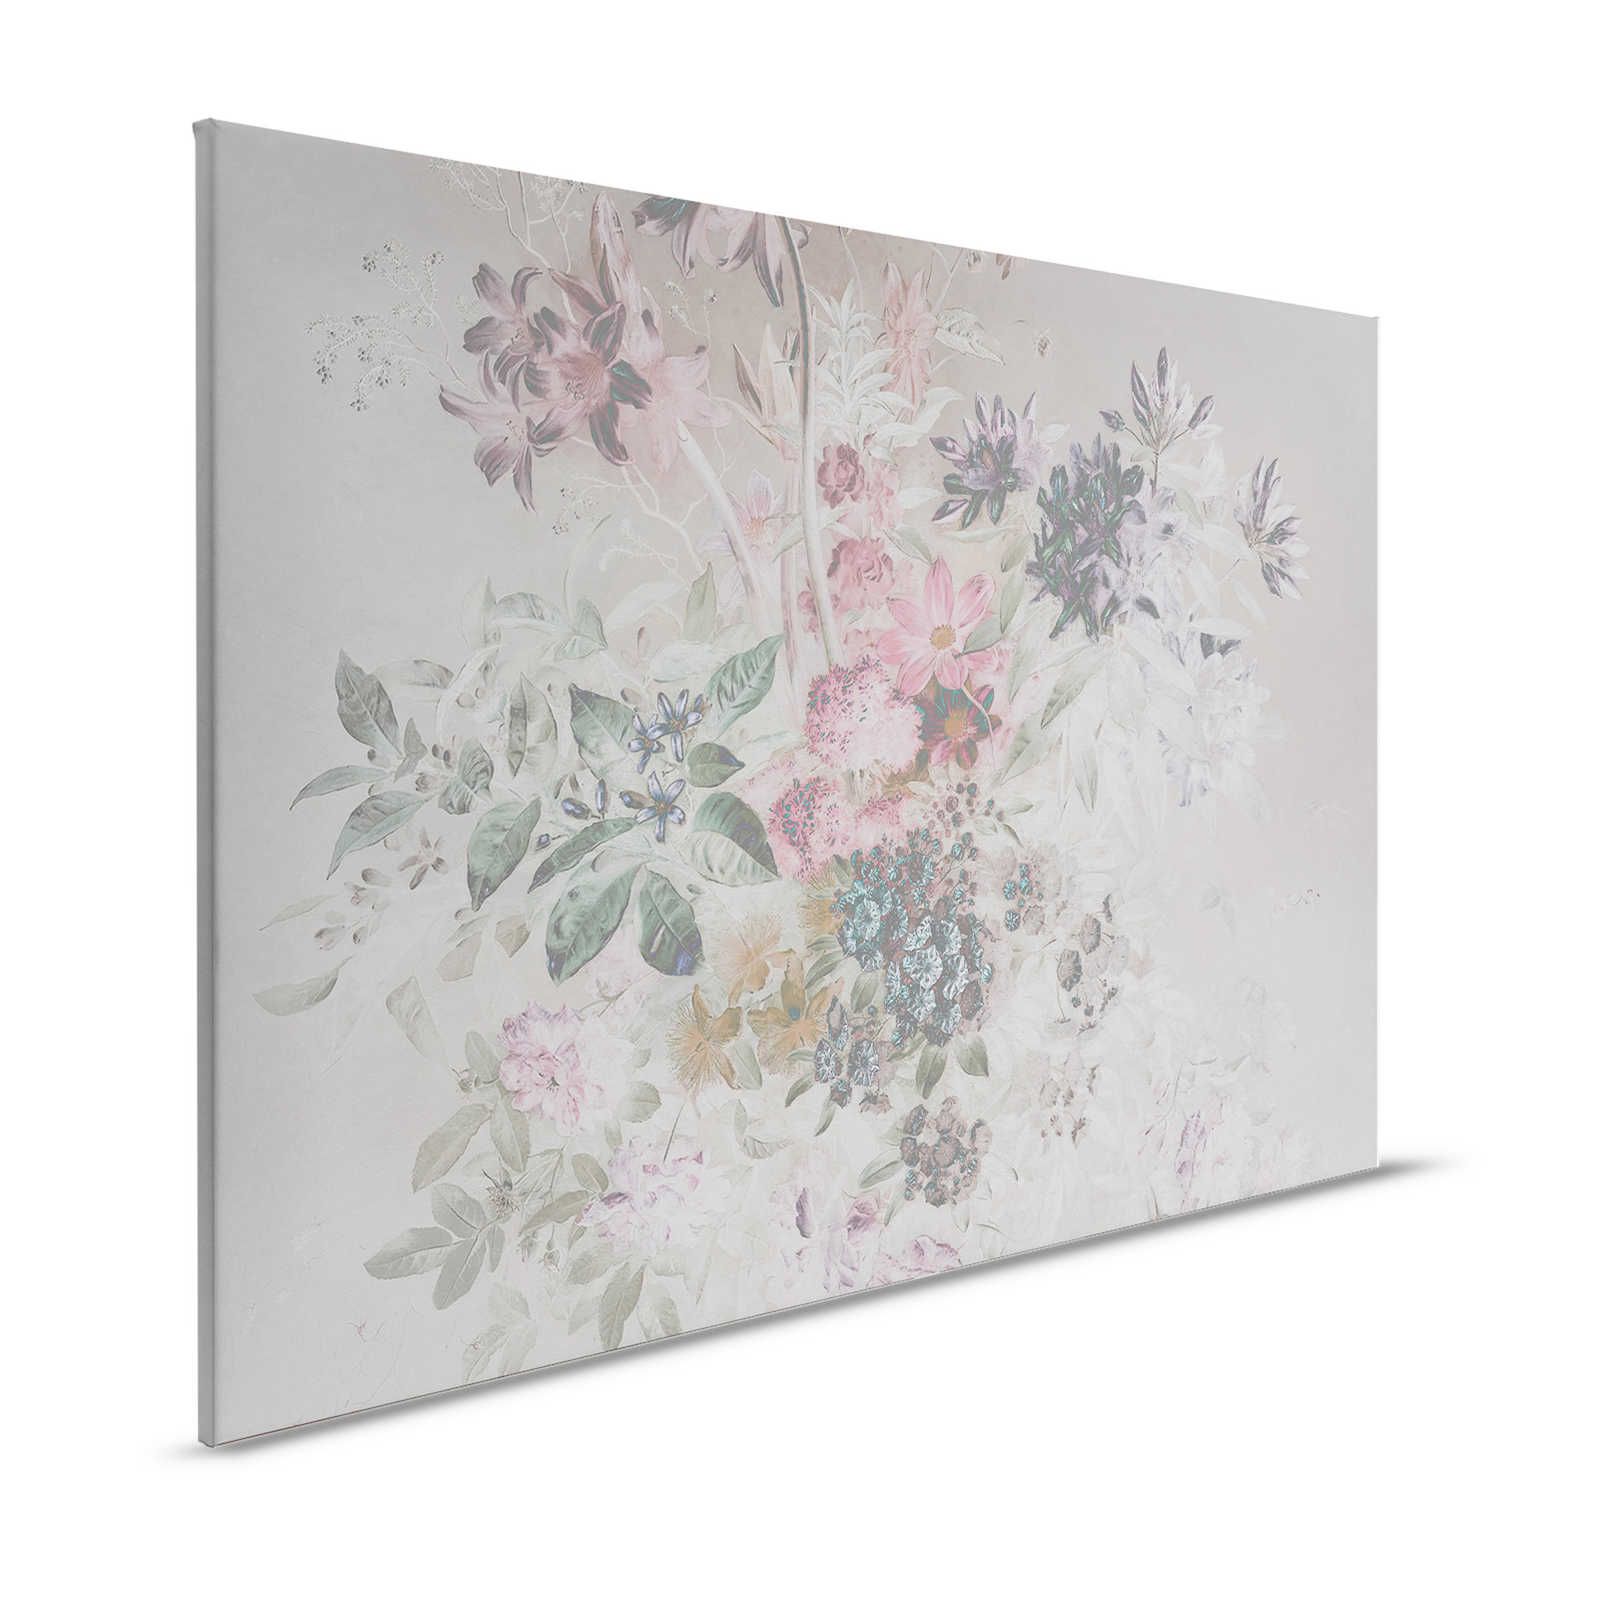 Flowers Canvas Painting with Pastel Design - 1.20 m x 0.80 m
